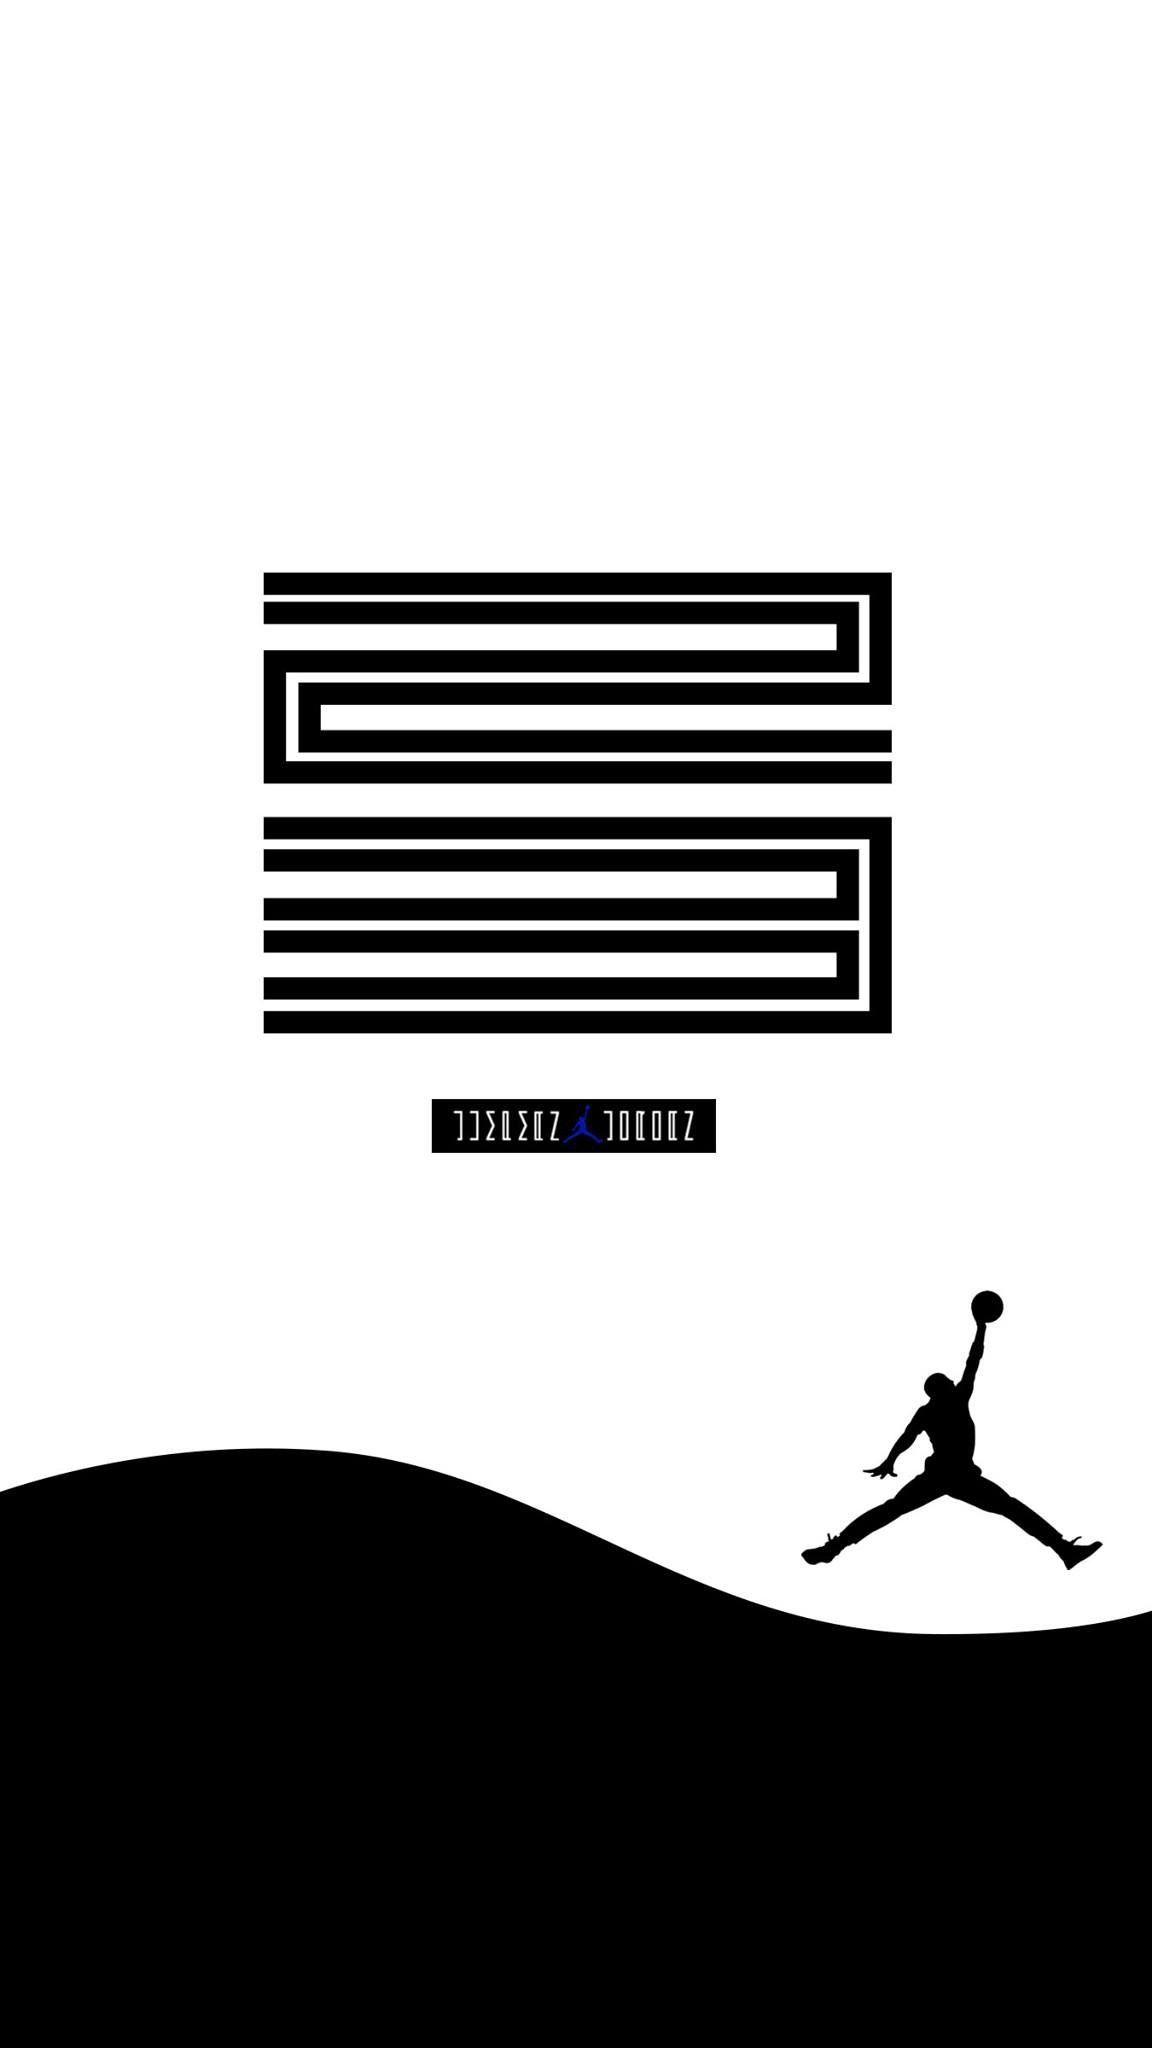 Jordan 11 concords mobile wallpaper. Projects to Try in 2018